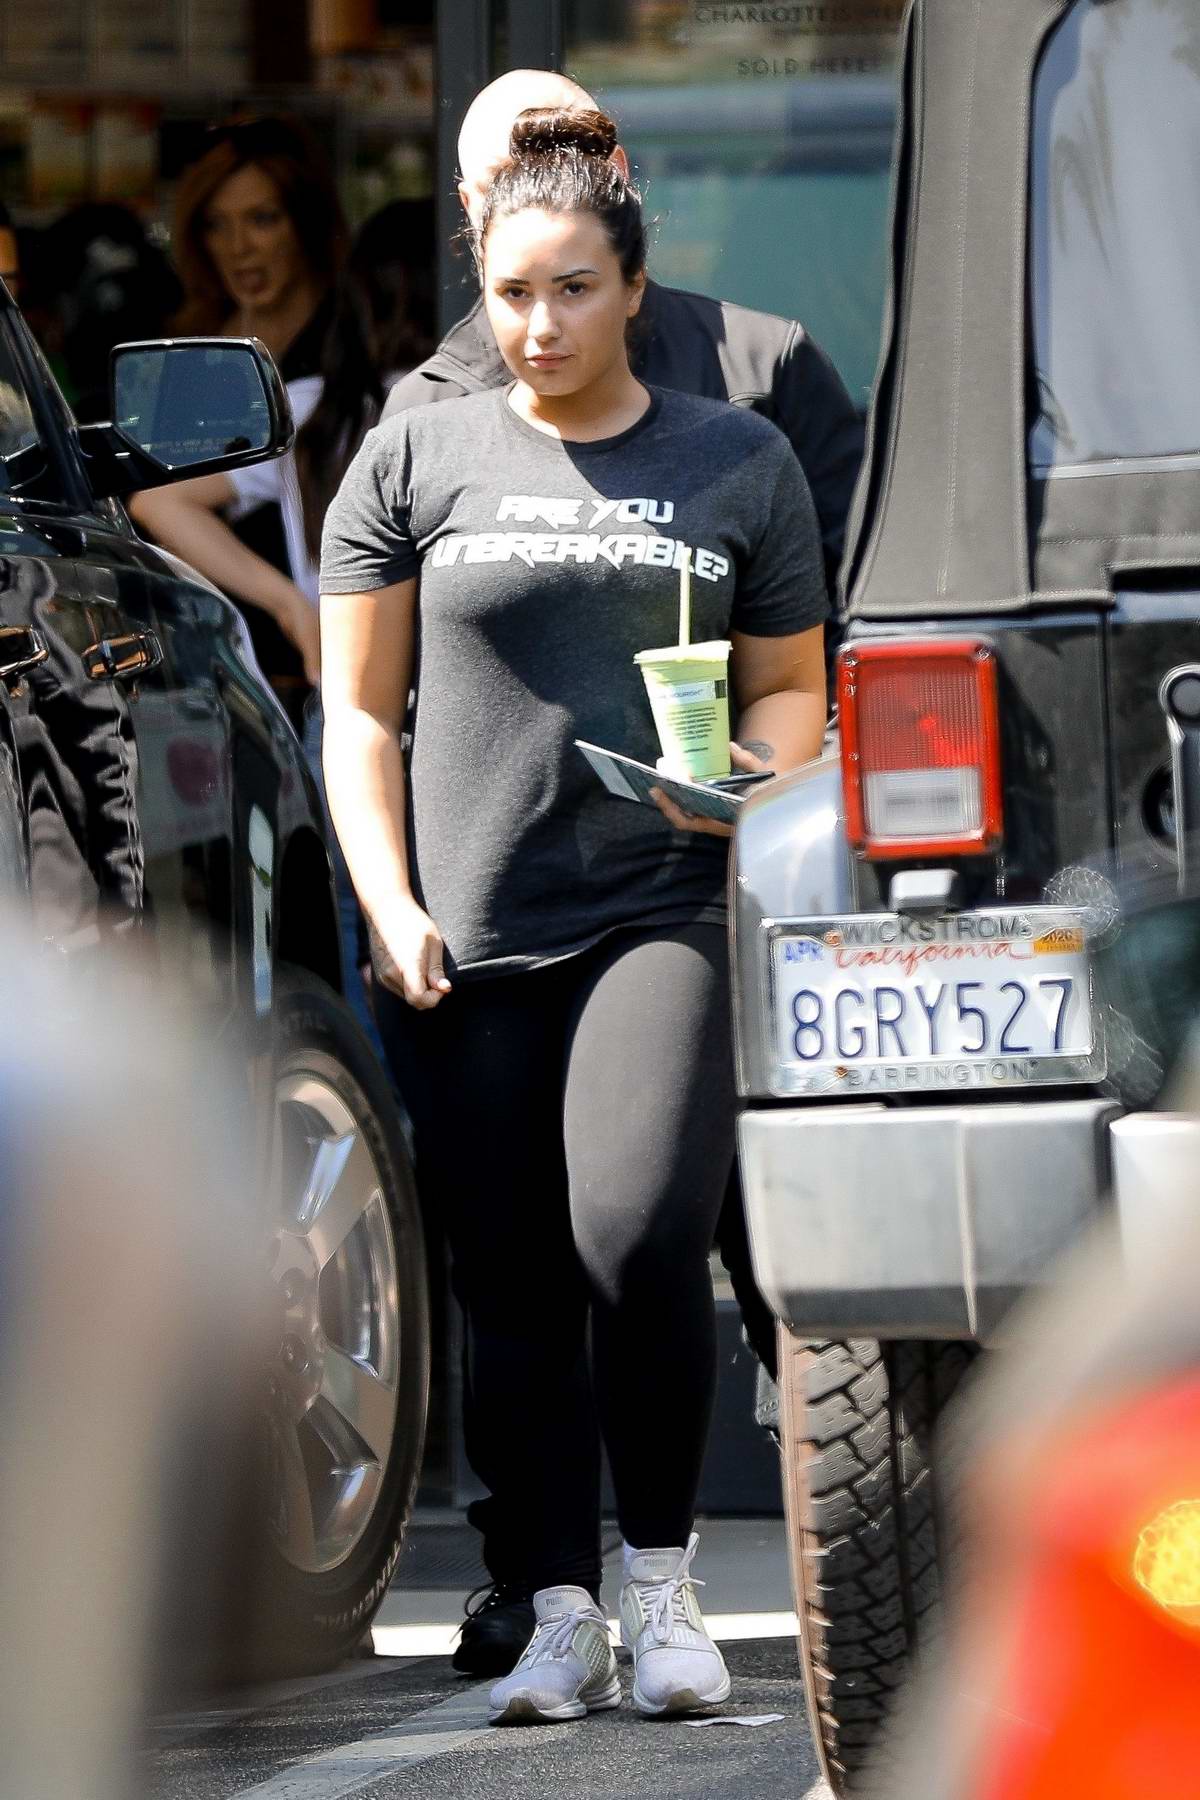 https://www.celebsfirst.com/wp-content/uploads/2019/03/demi-lovato-spotted-in-a-dark-grey-tee-and-black-leggings-as-she-grabs-some-juice-after-her-workout-in-los-angeles260319_3.jpg